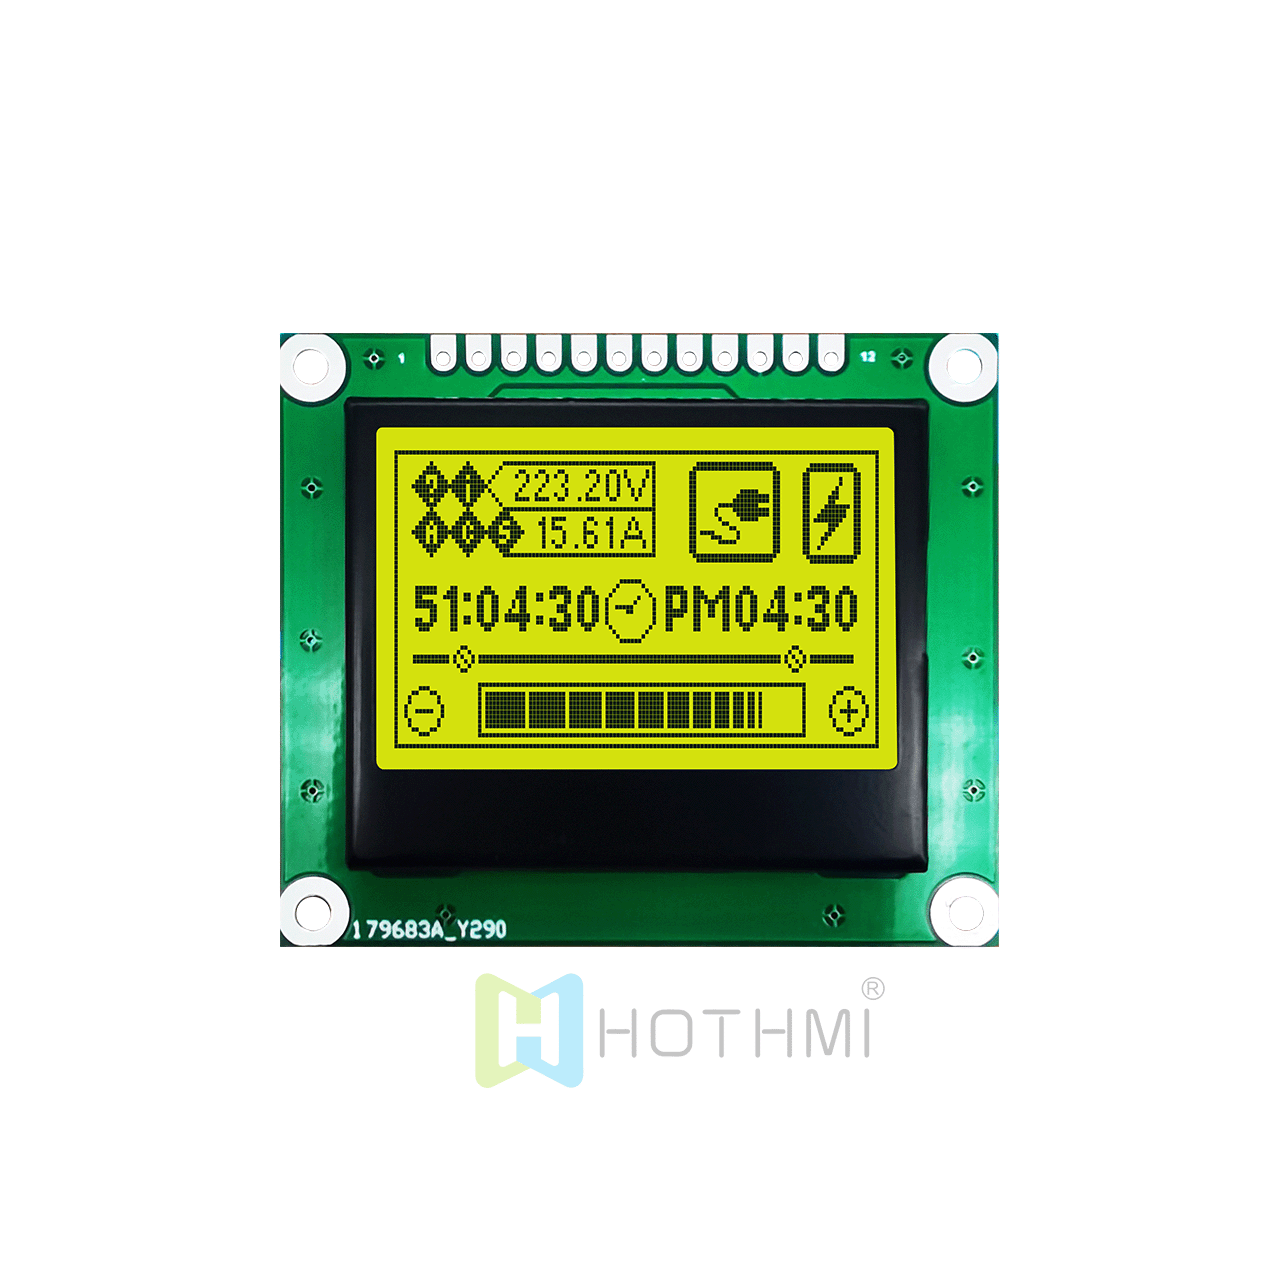 1.7 inch LCD 128x64 Graphic LCD Display | ST7567 | SPI Interface | Graphic Module Display, STN + Yellow-Green Backlight | With Datasheet